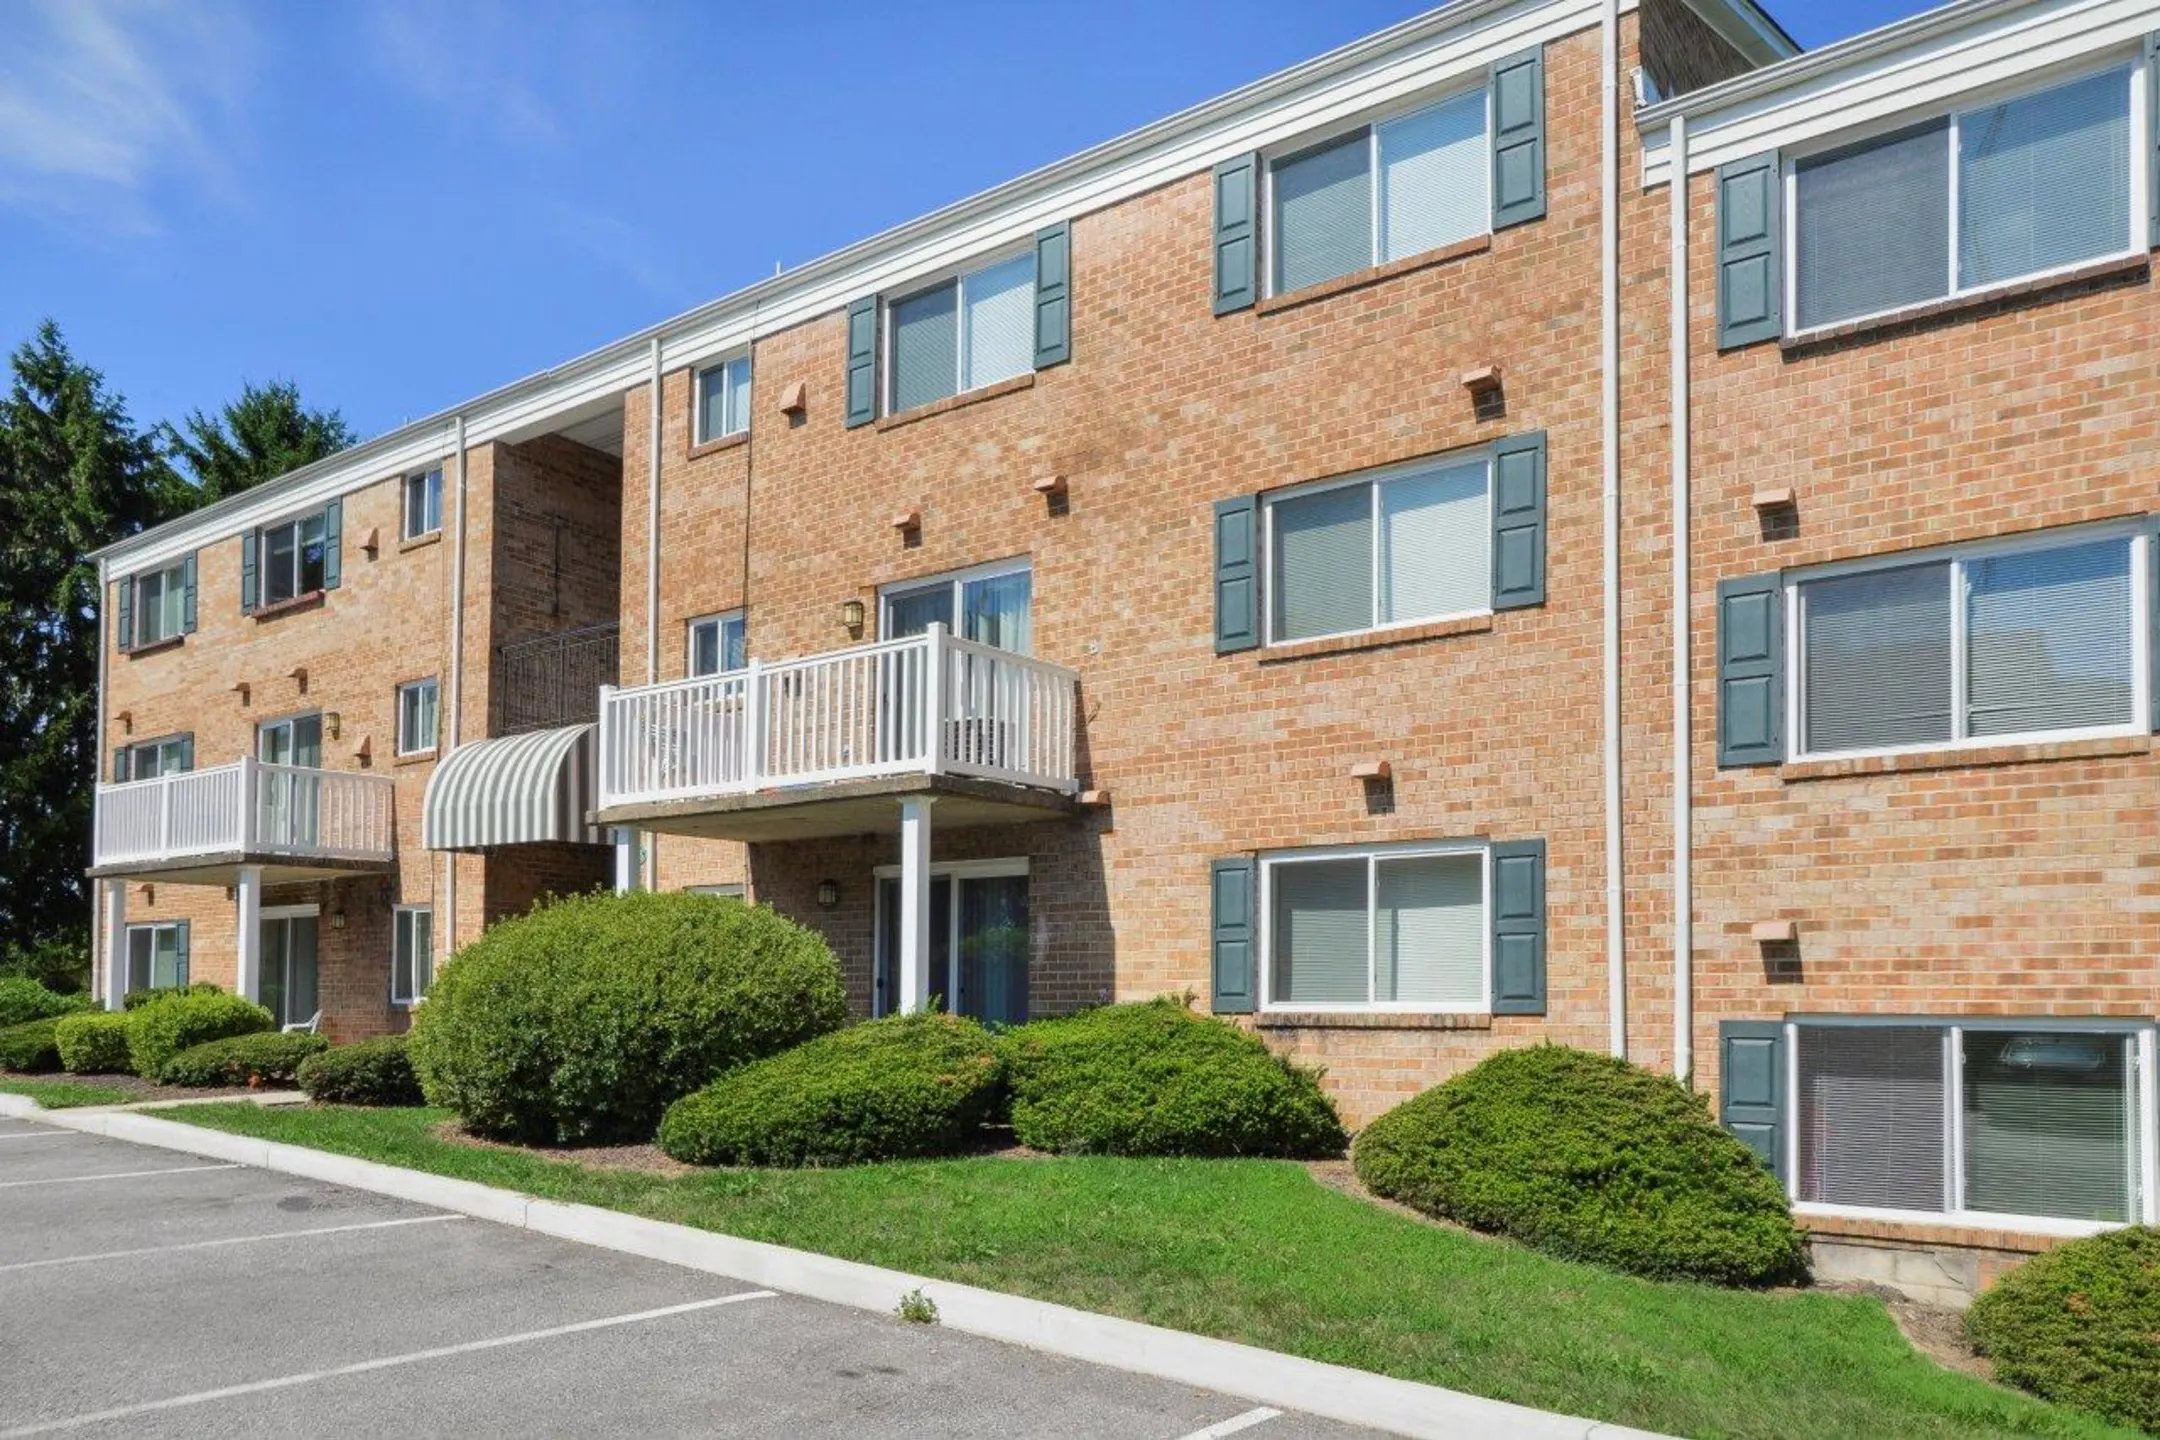 Building - Westerlee Apartment Homes - Catonsville, MD